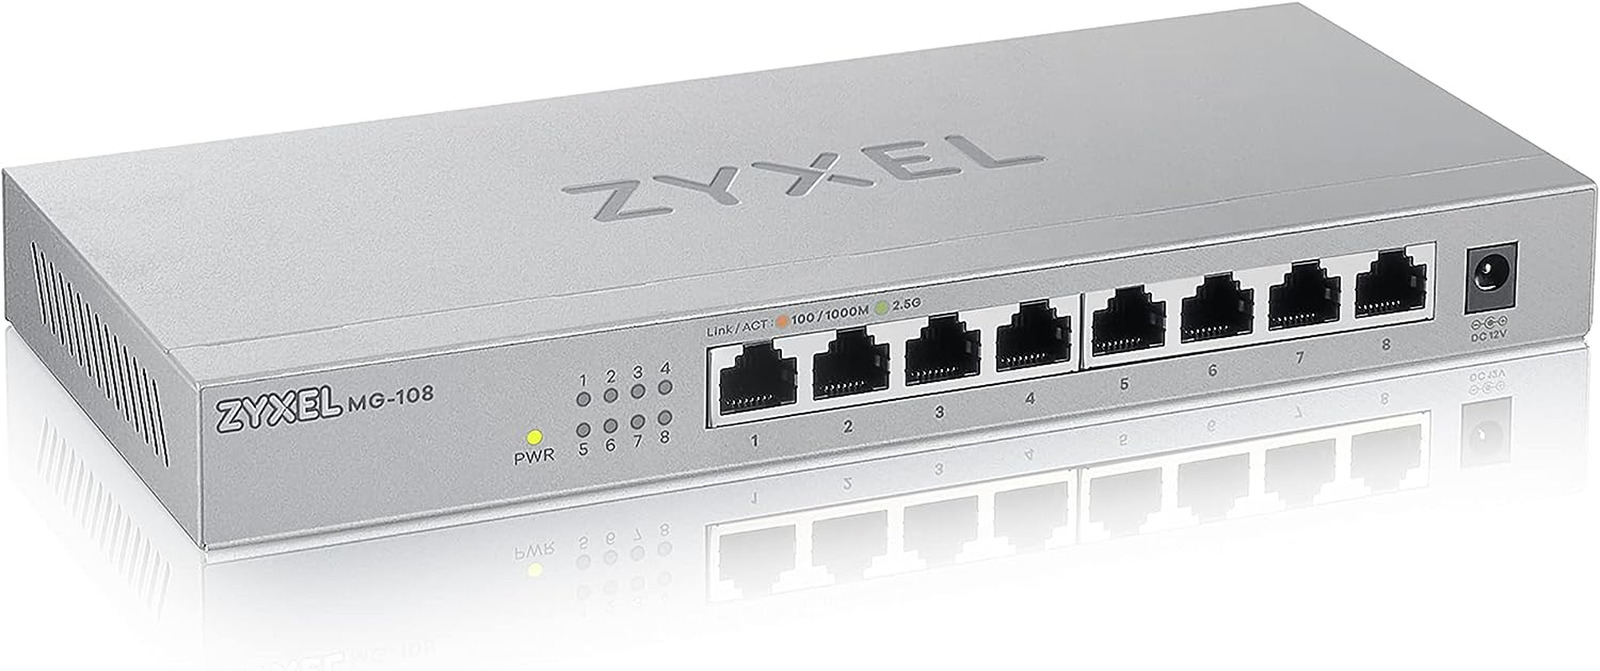 8-Port 2.5G Multi-Gigabit Unmanaged Switch for Home Entertainment or SOHO Networ